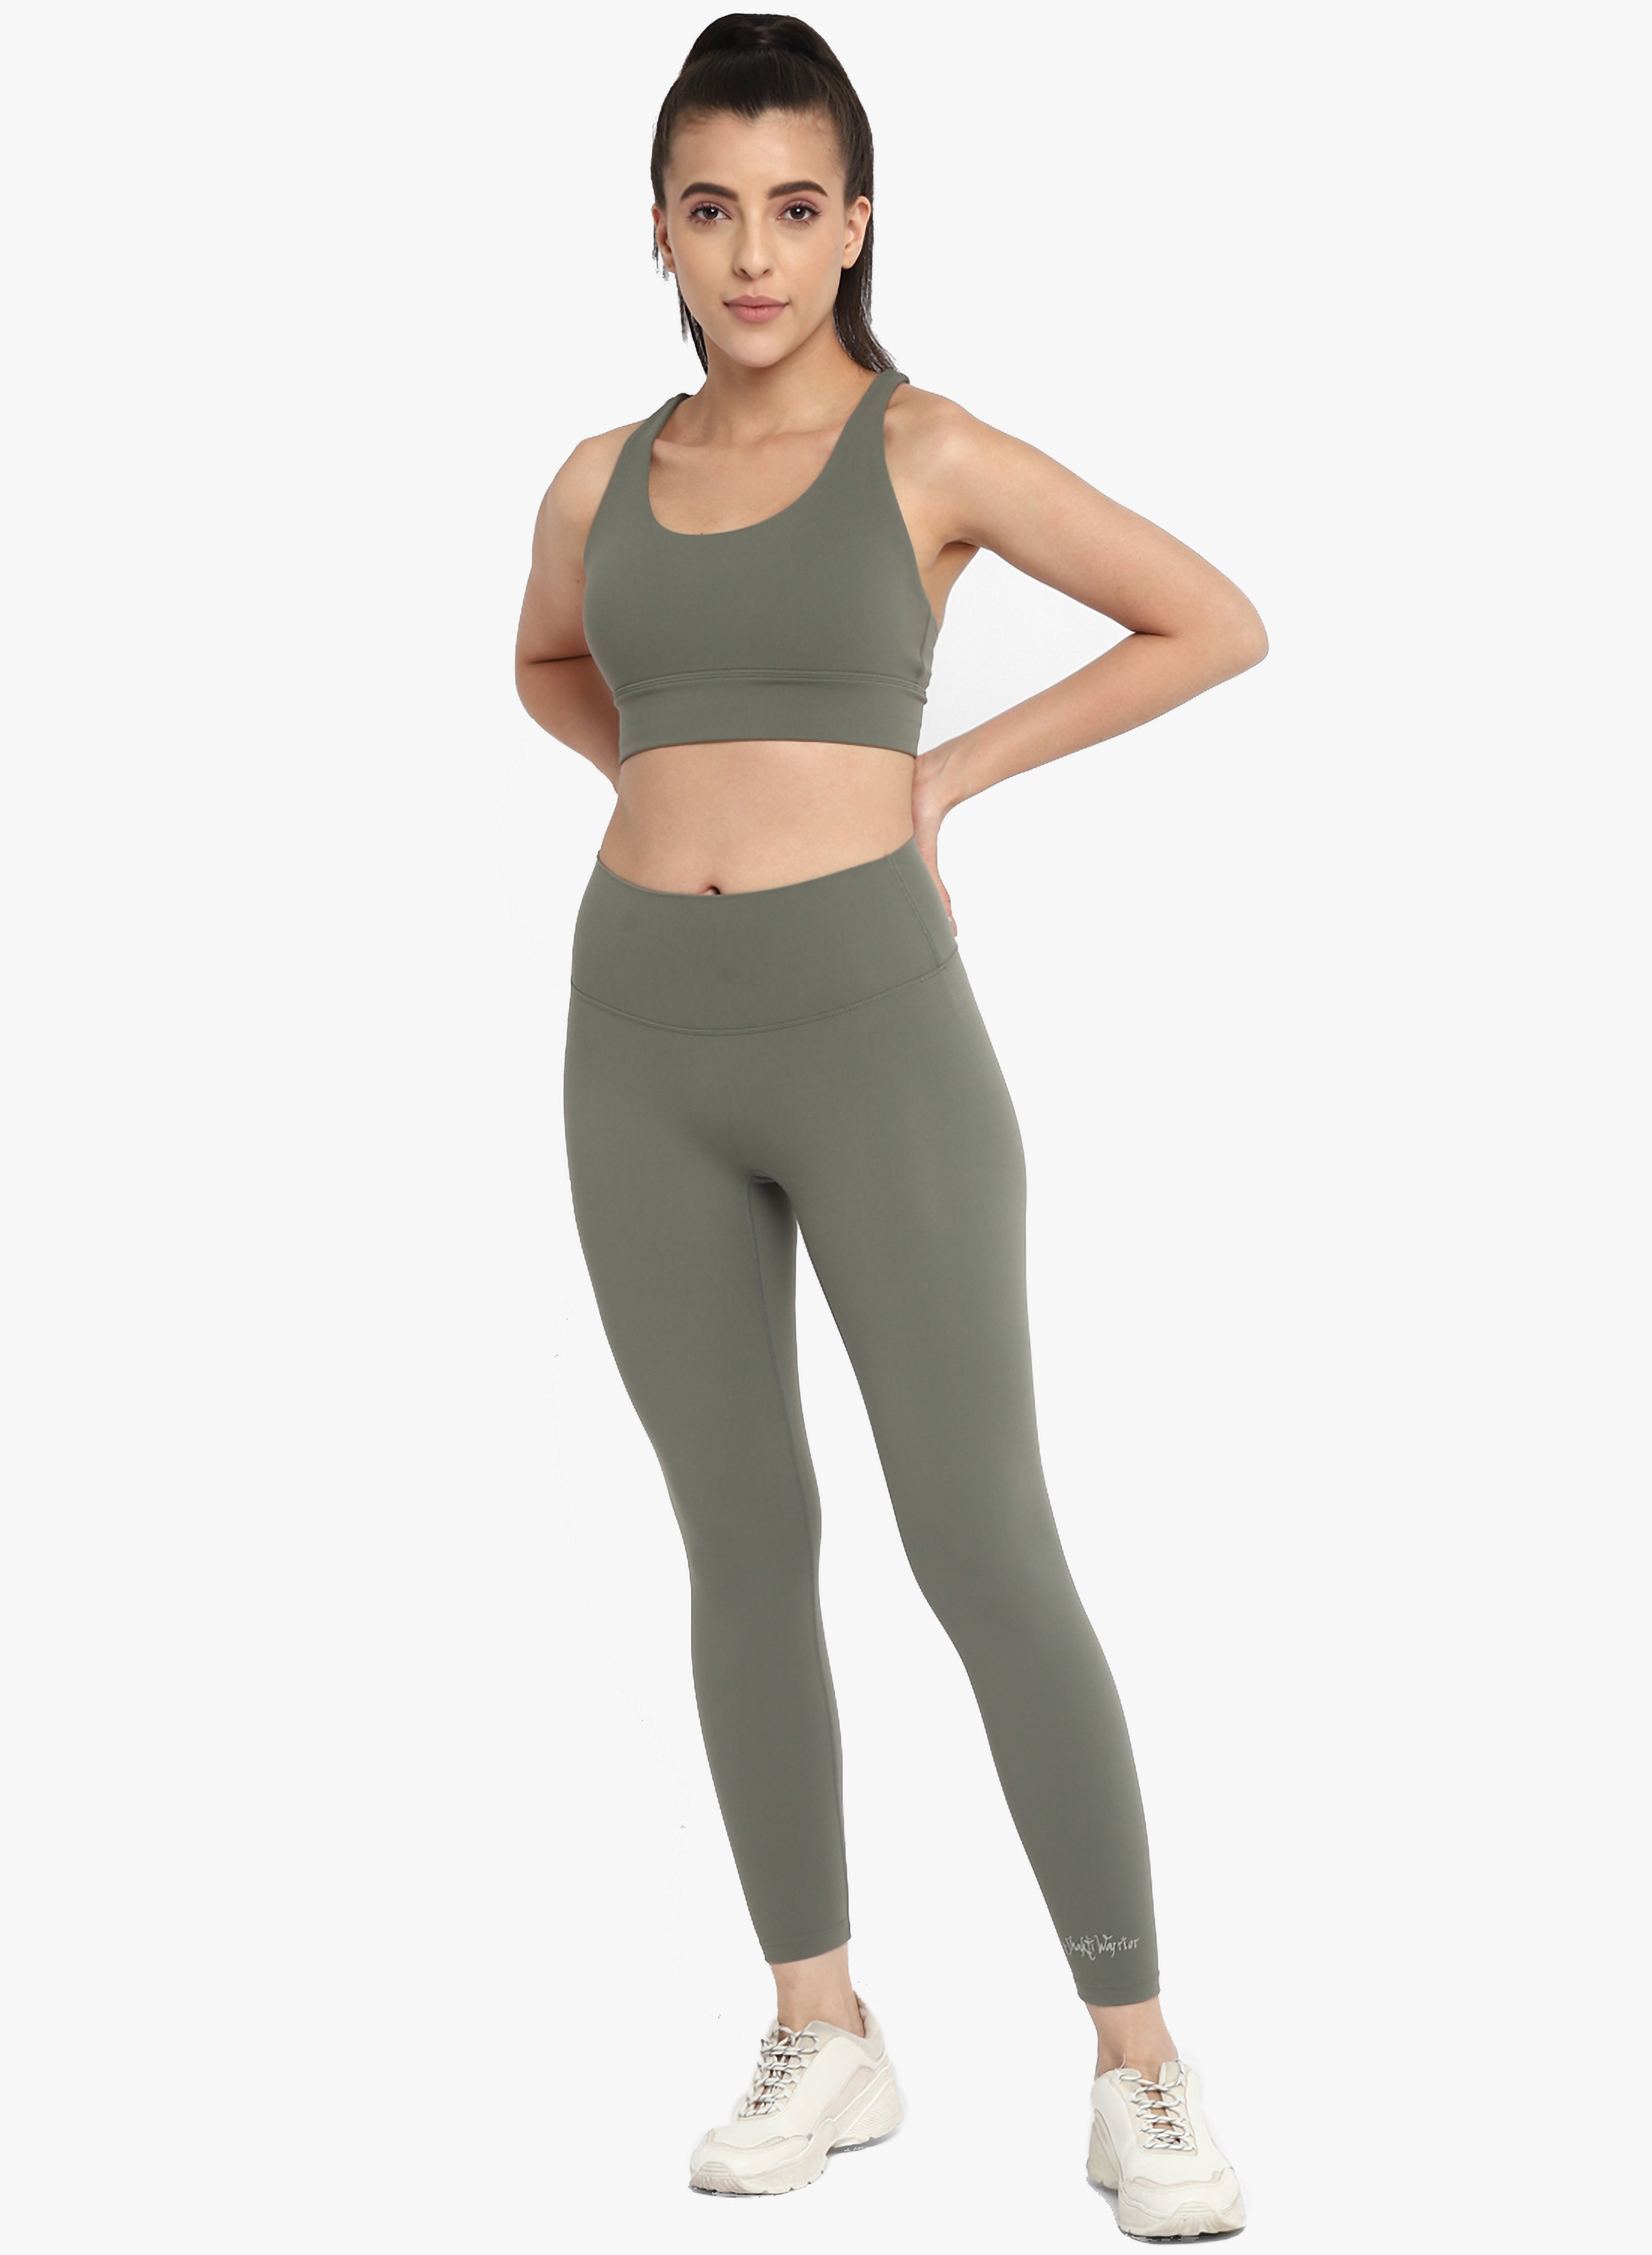 Forest green Tights And Vest Sets-Yoga – Naikeway